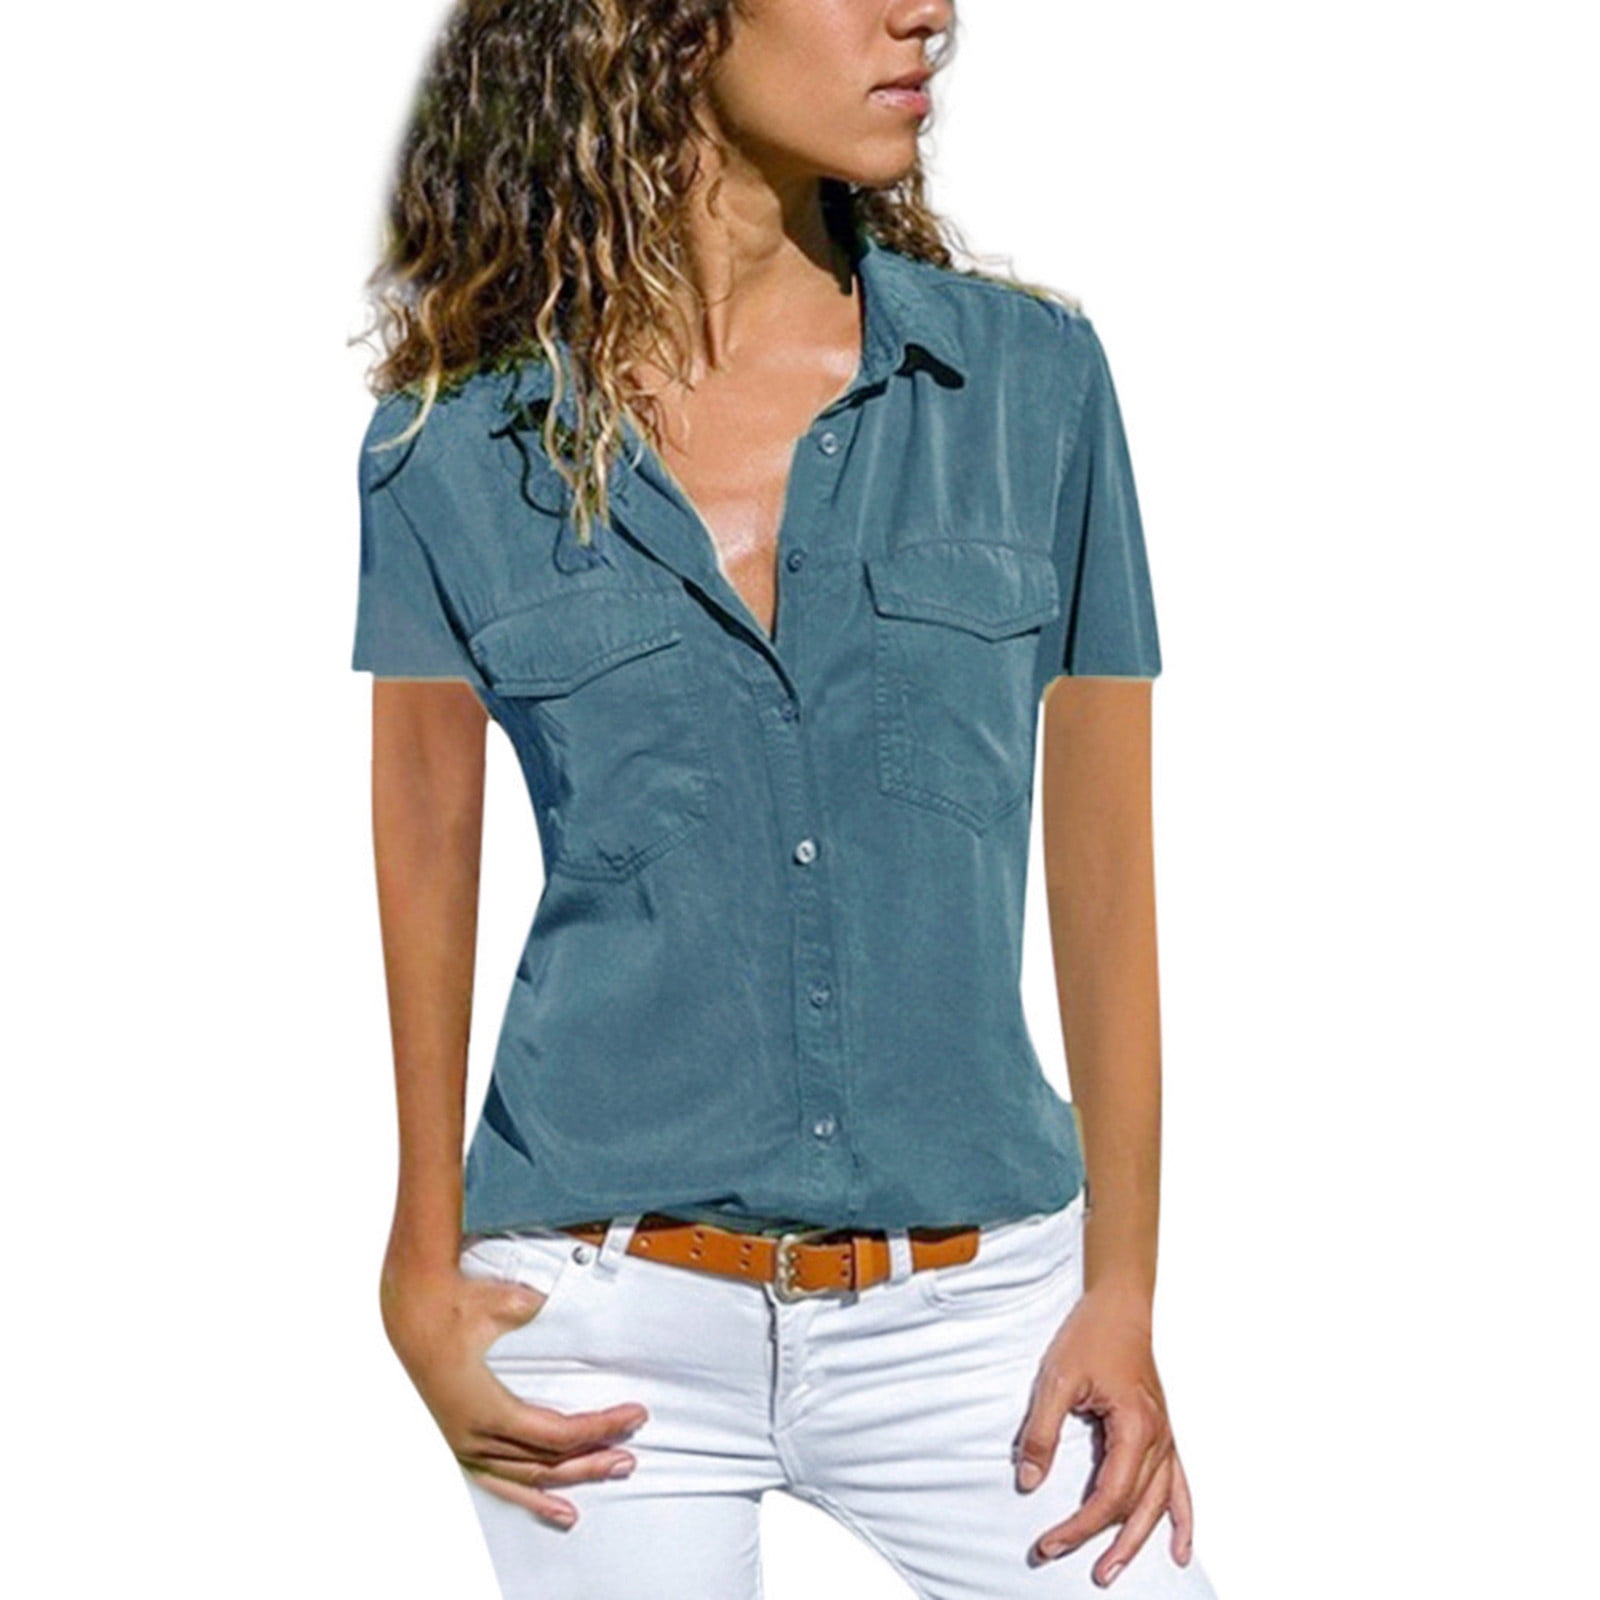 solacol Womens Tops Casual Short Sleeve Button Down Shirts for